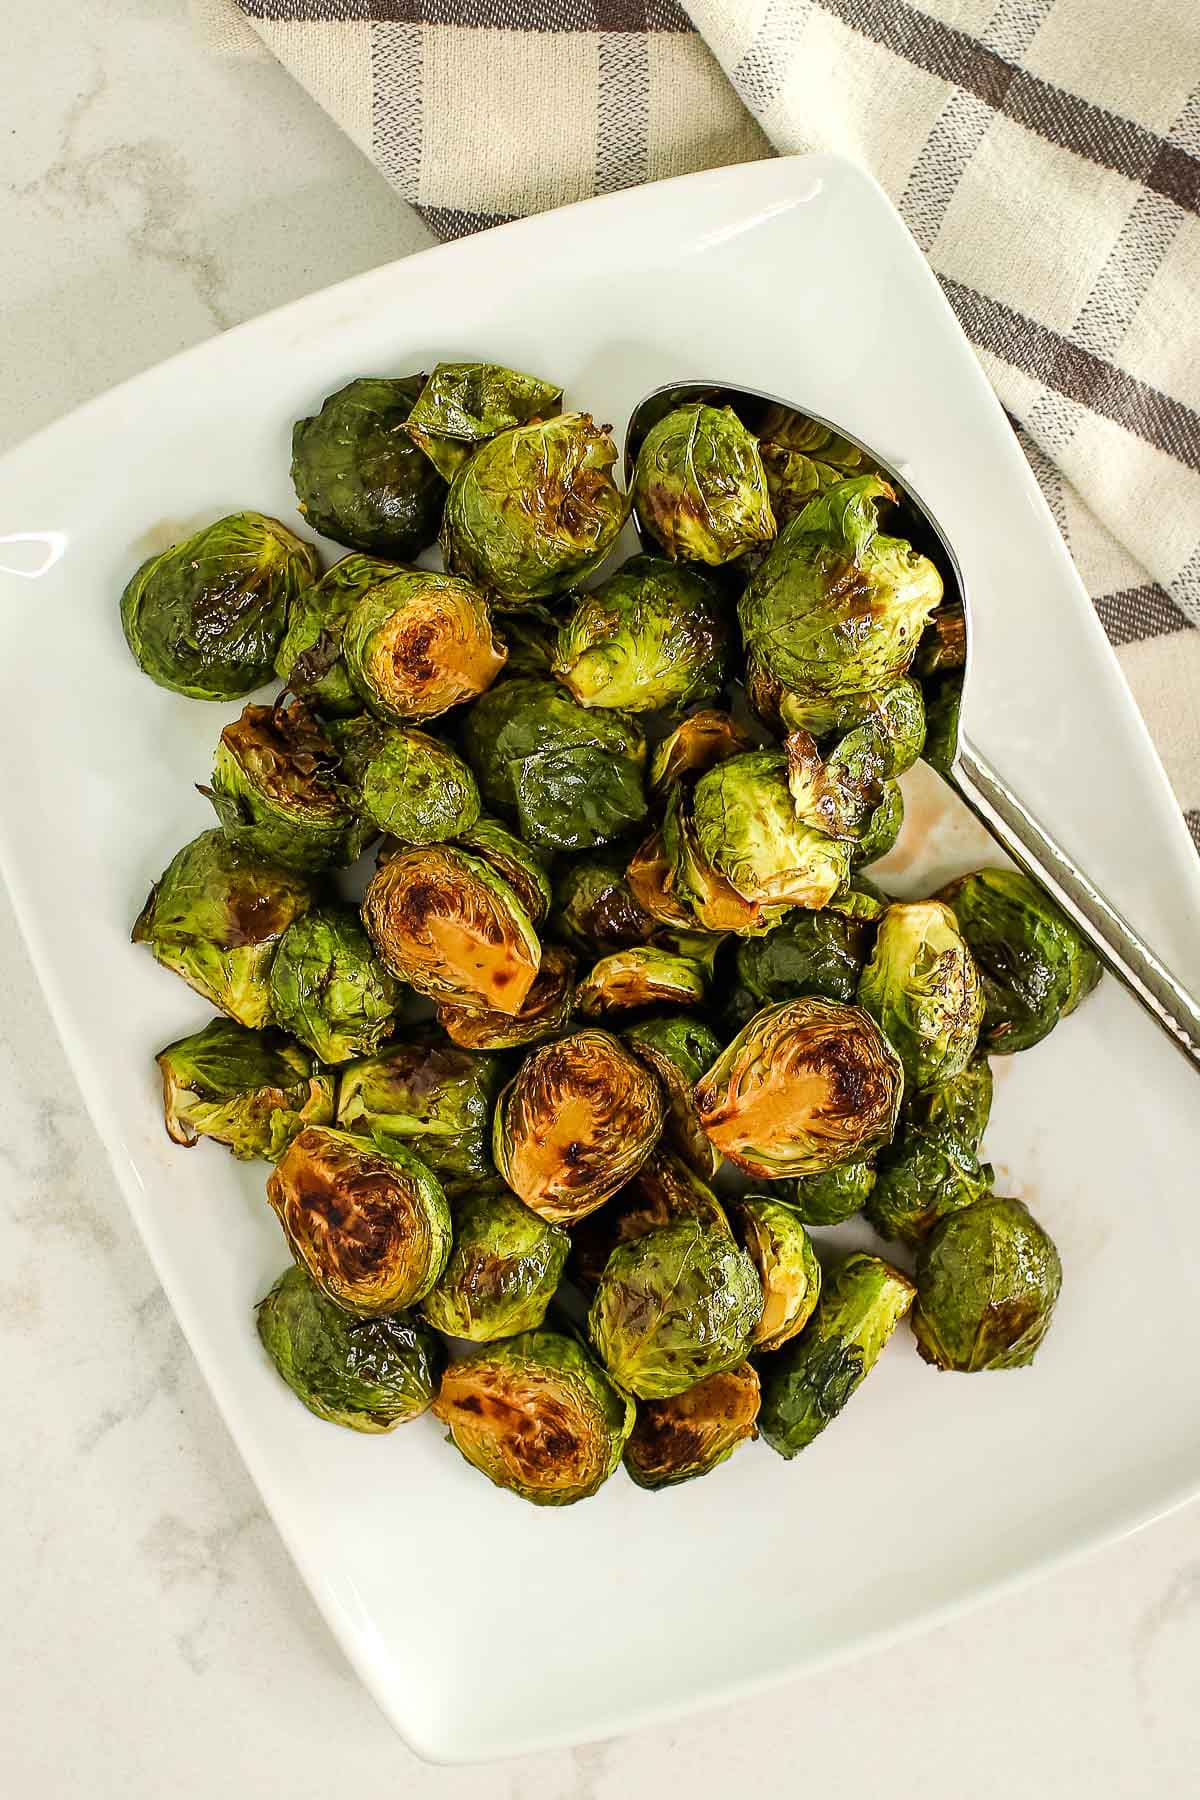 Plate of finished glazed Brussels sprouts with spoon and towel.